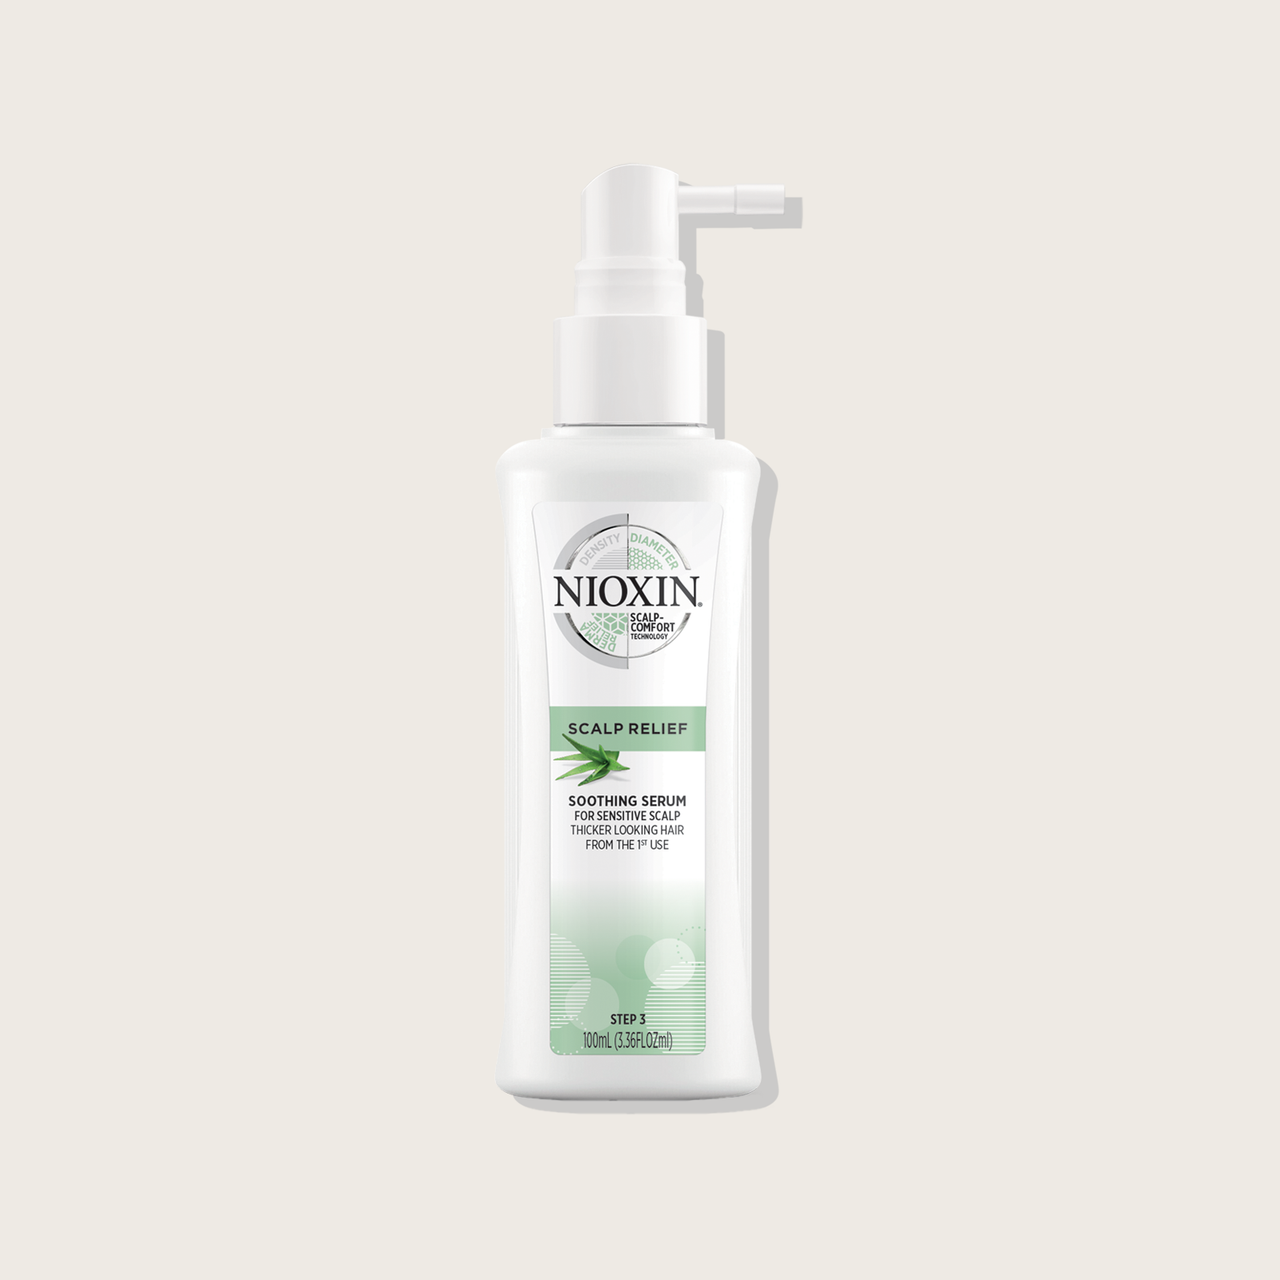 Nioxin SCALP RELIEF SOOTHING SERUM 